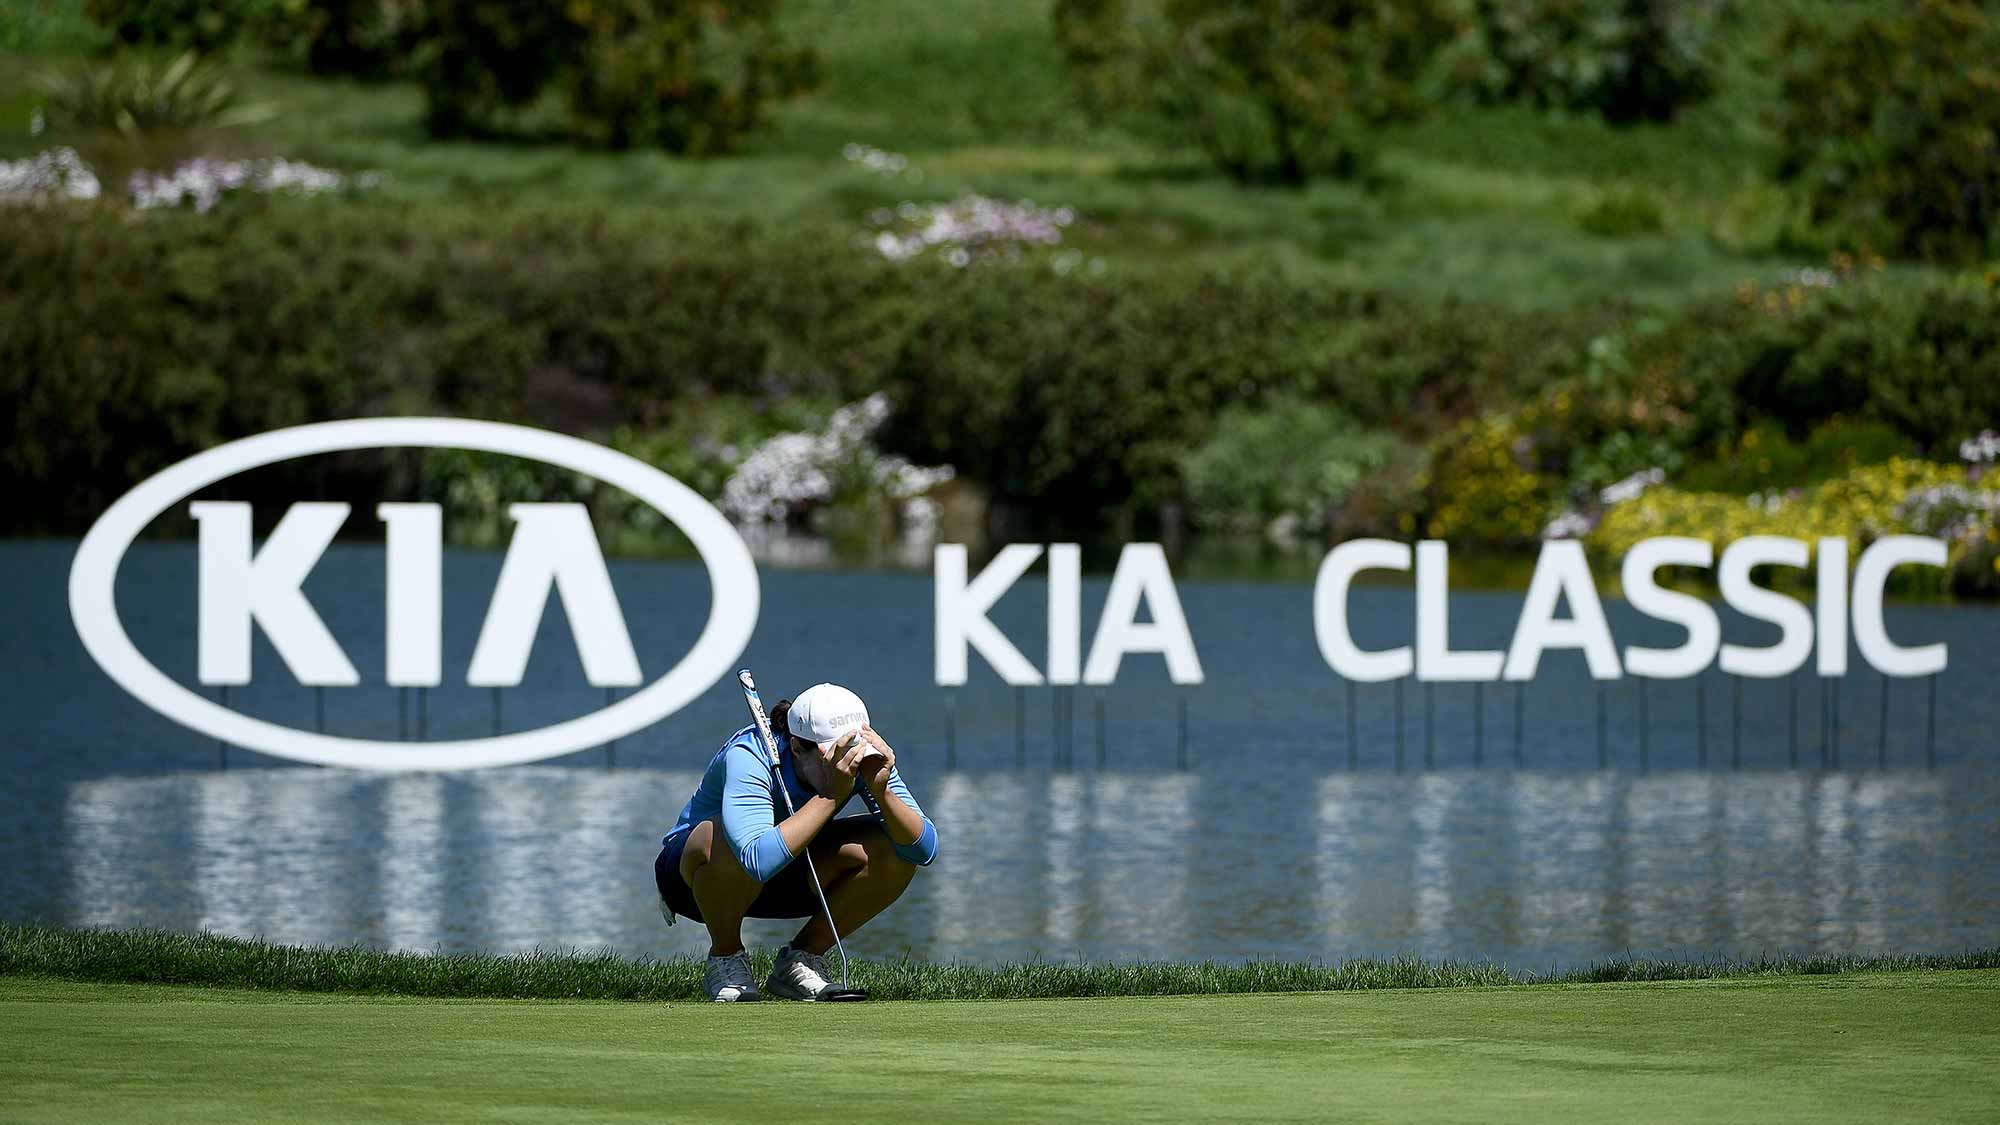 Carlota Ciganda of Spain lines up her putt on the 15th green during the First Round of the KIA Classic at the Park Hyatt Aviara Resort